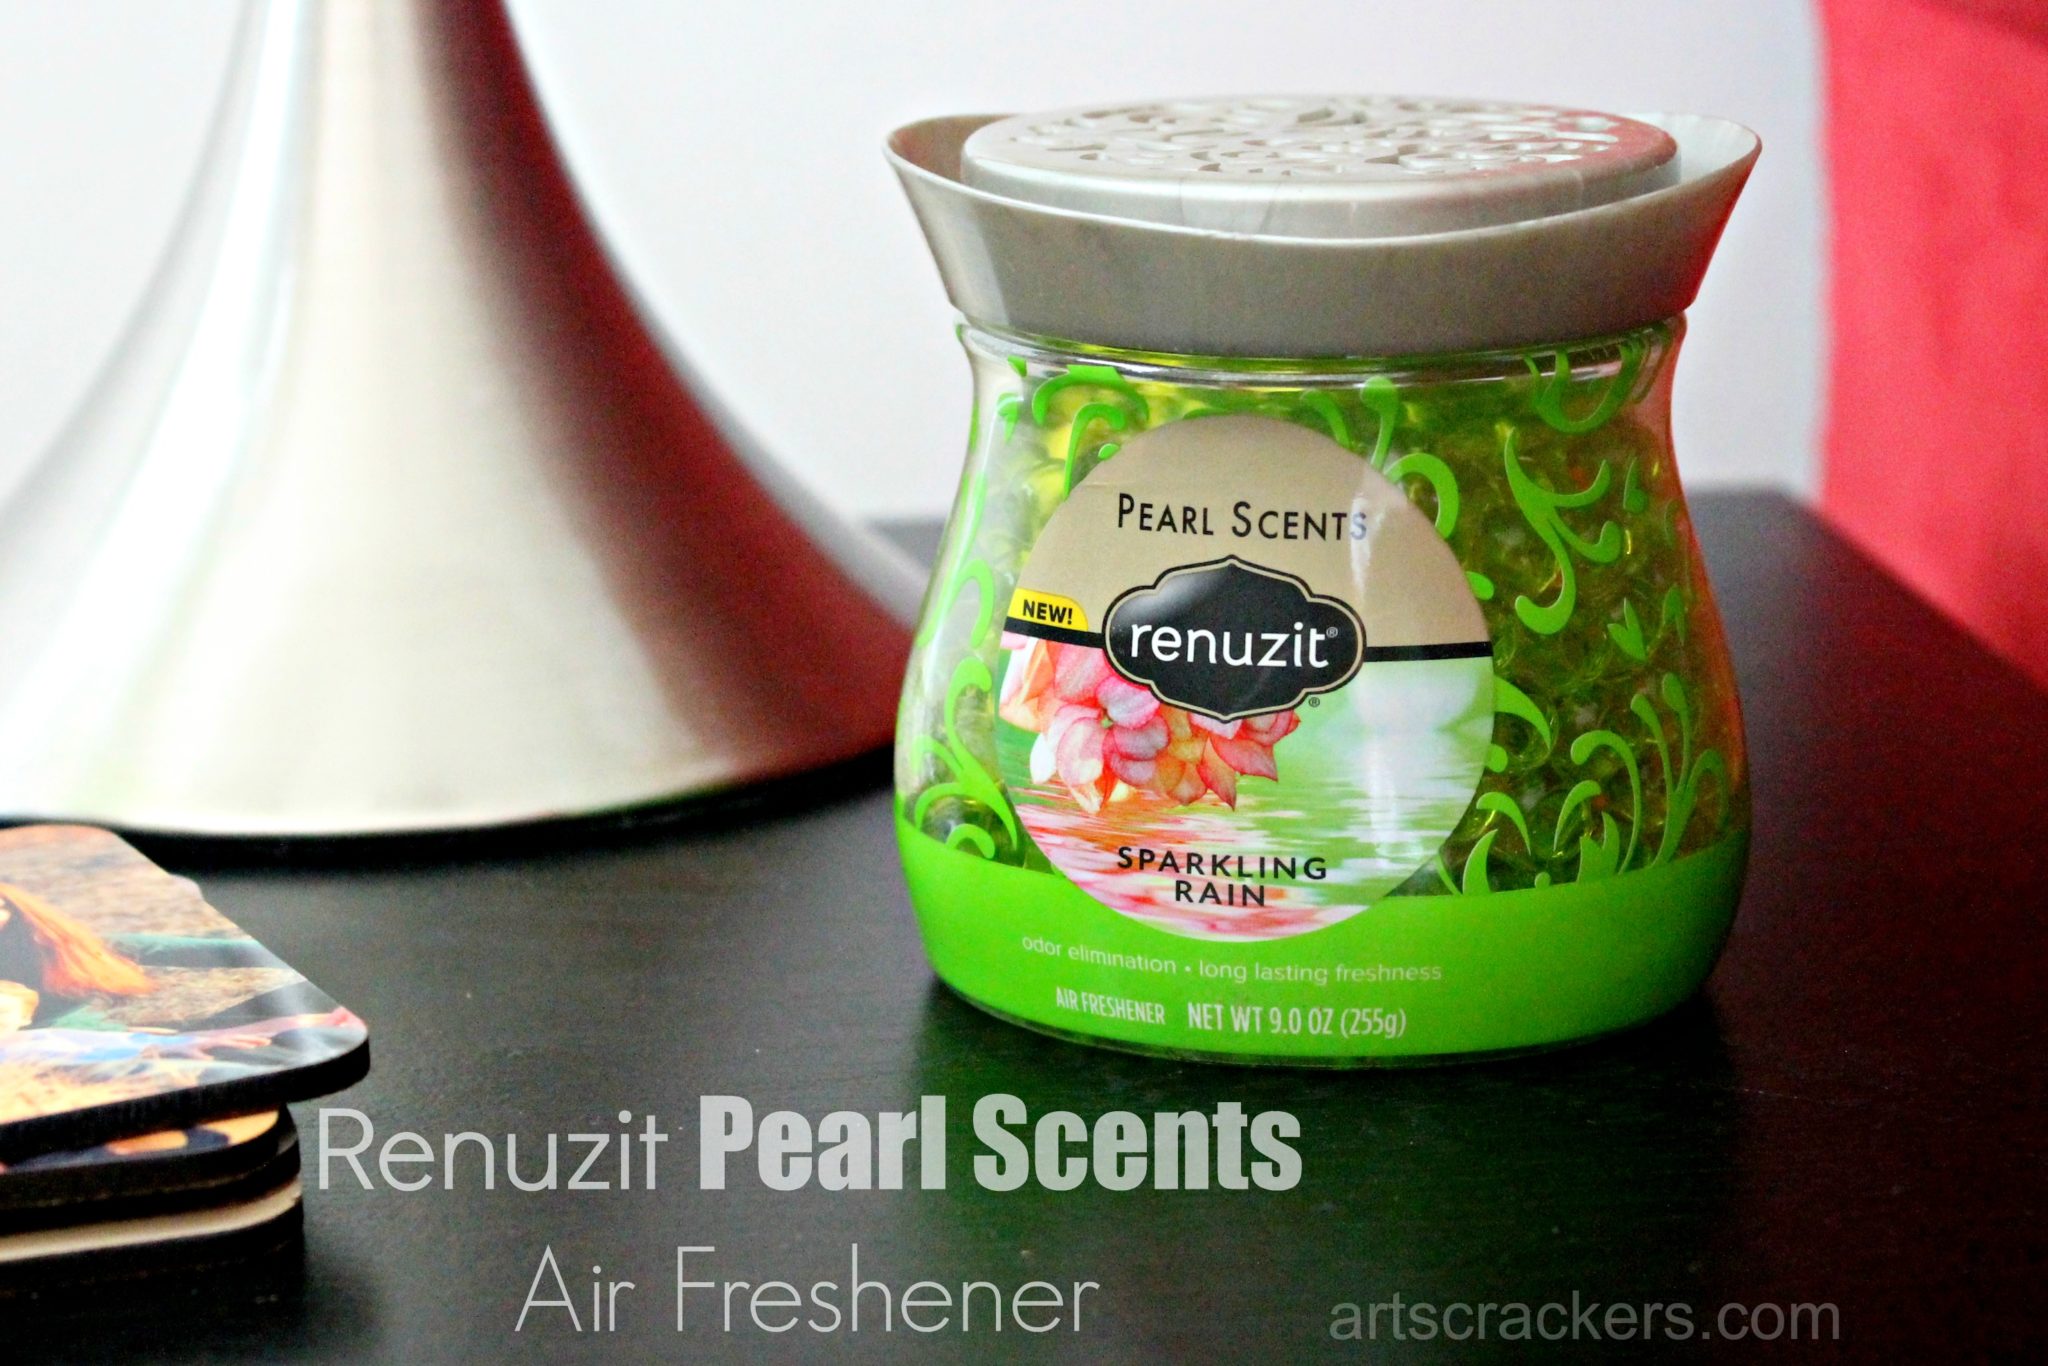 Renuzit Pearl Scents. Click the picture to read the review.